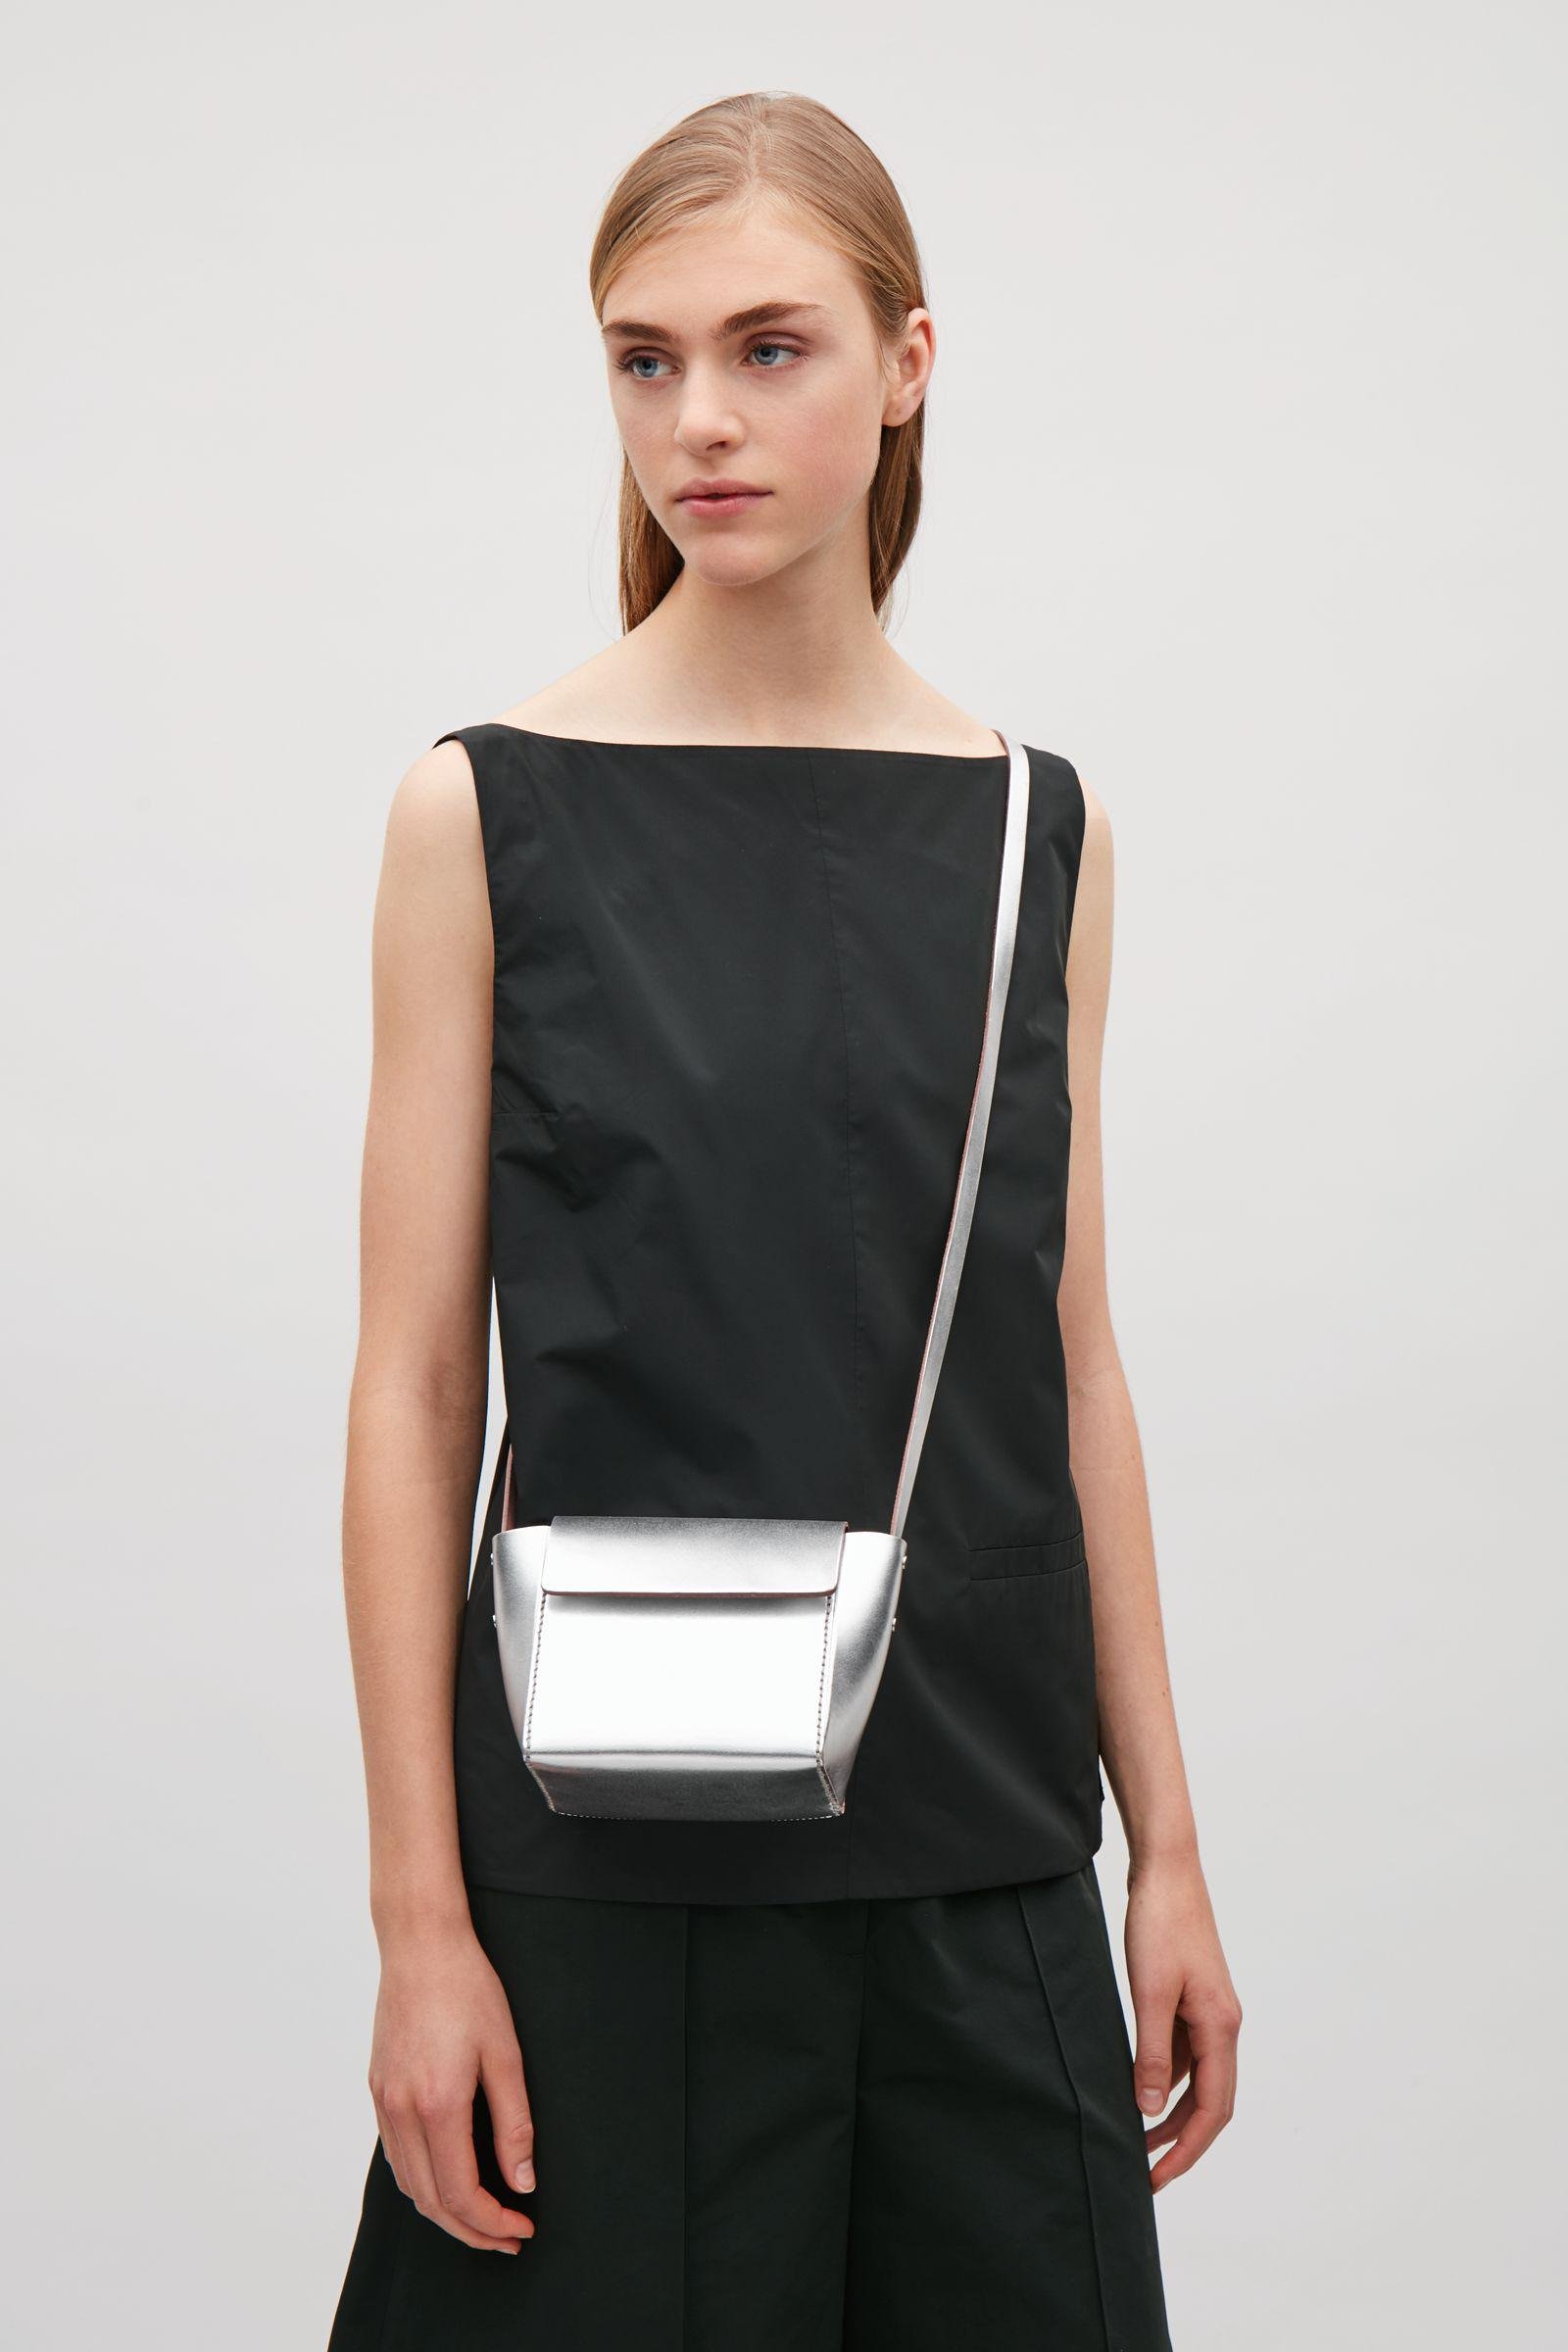 COS Small Constructed Bag in Metallic | Lyst